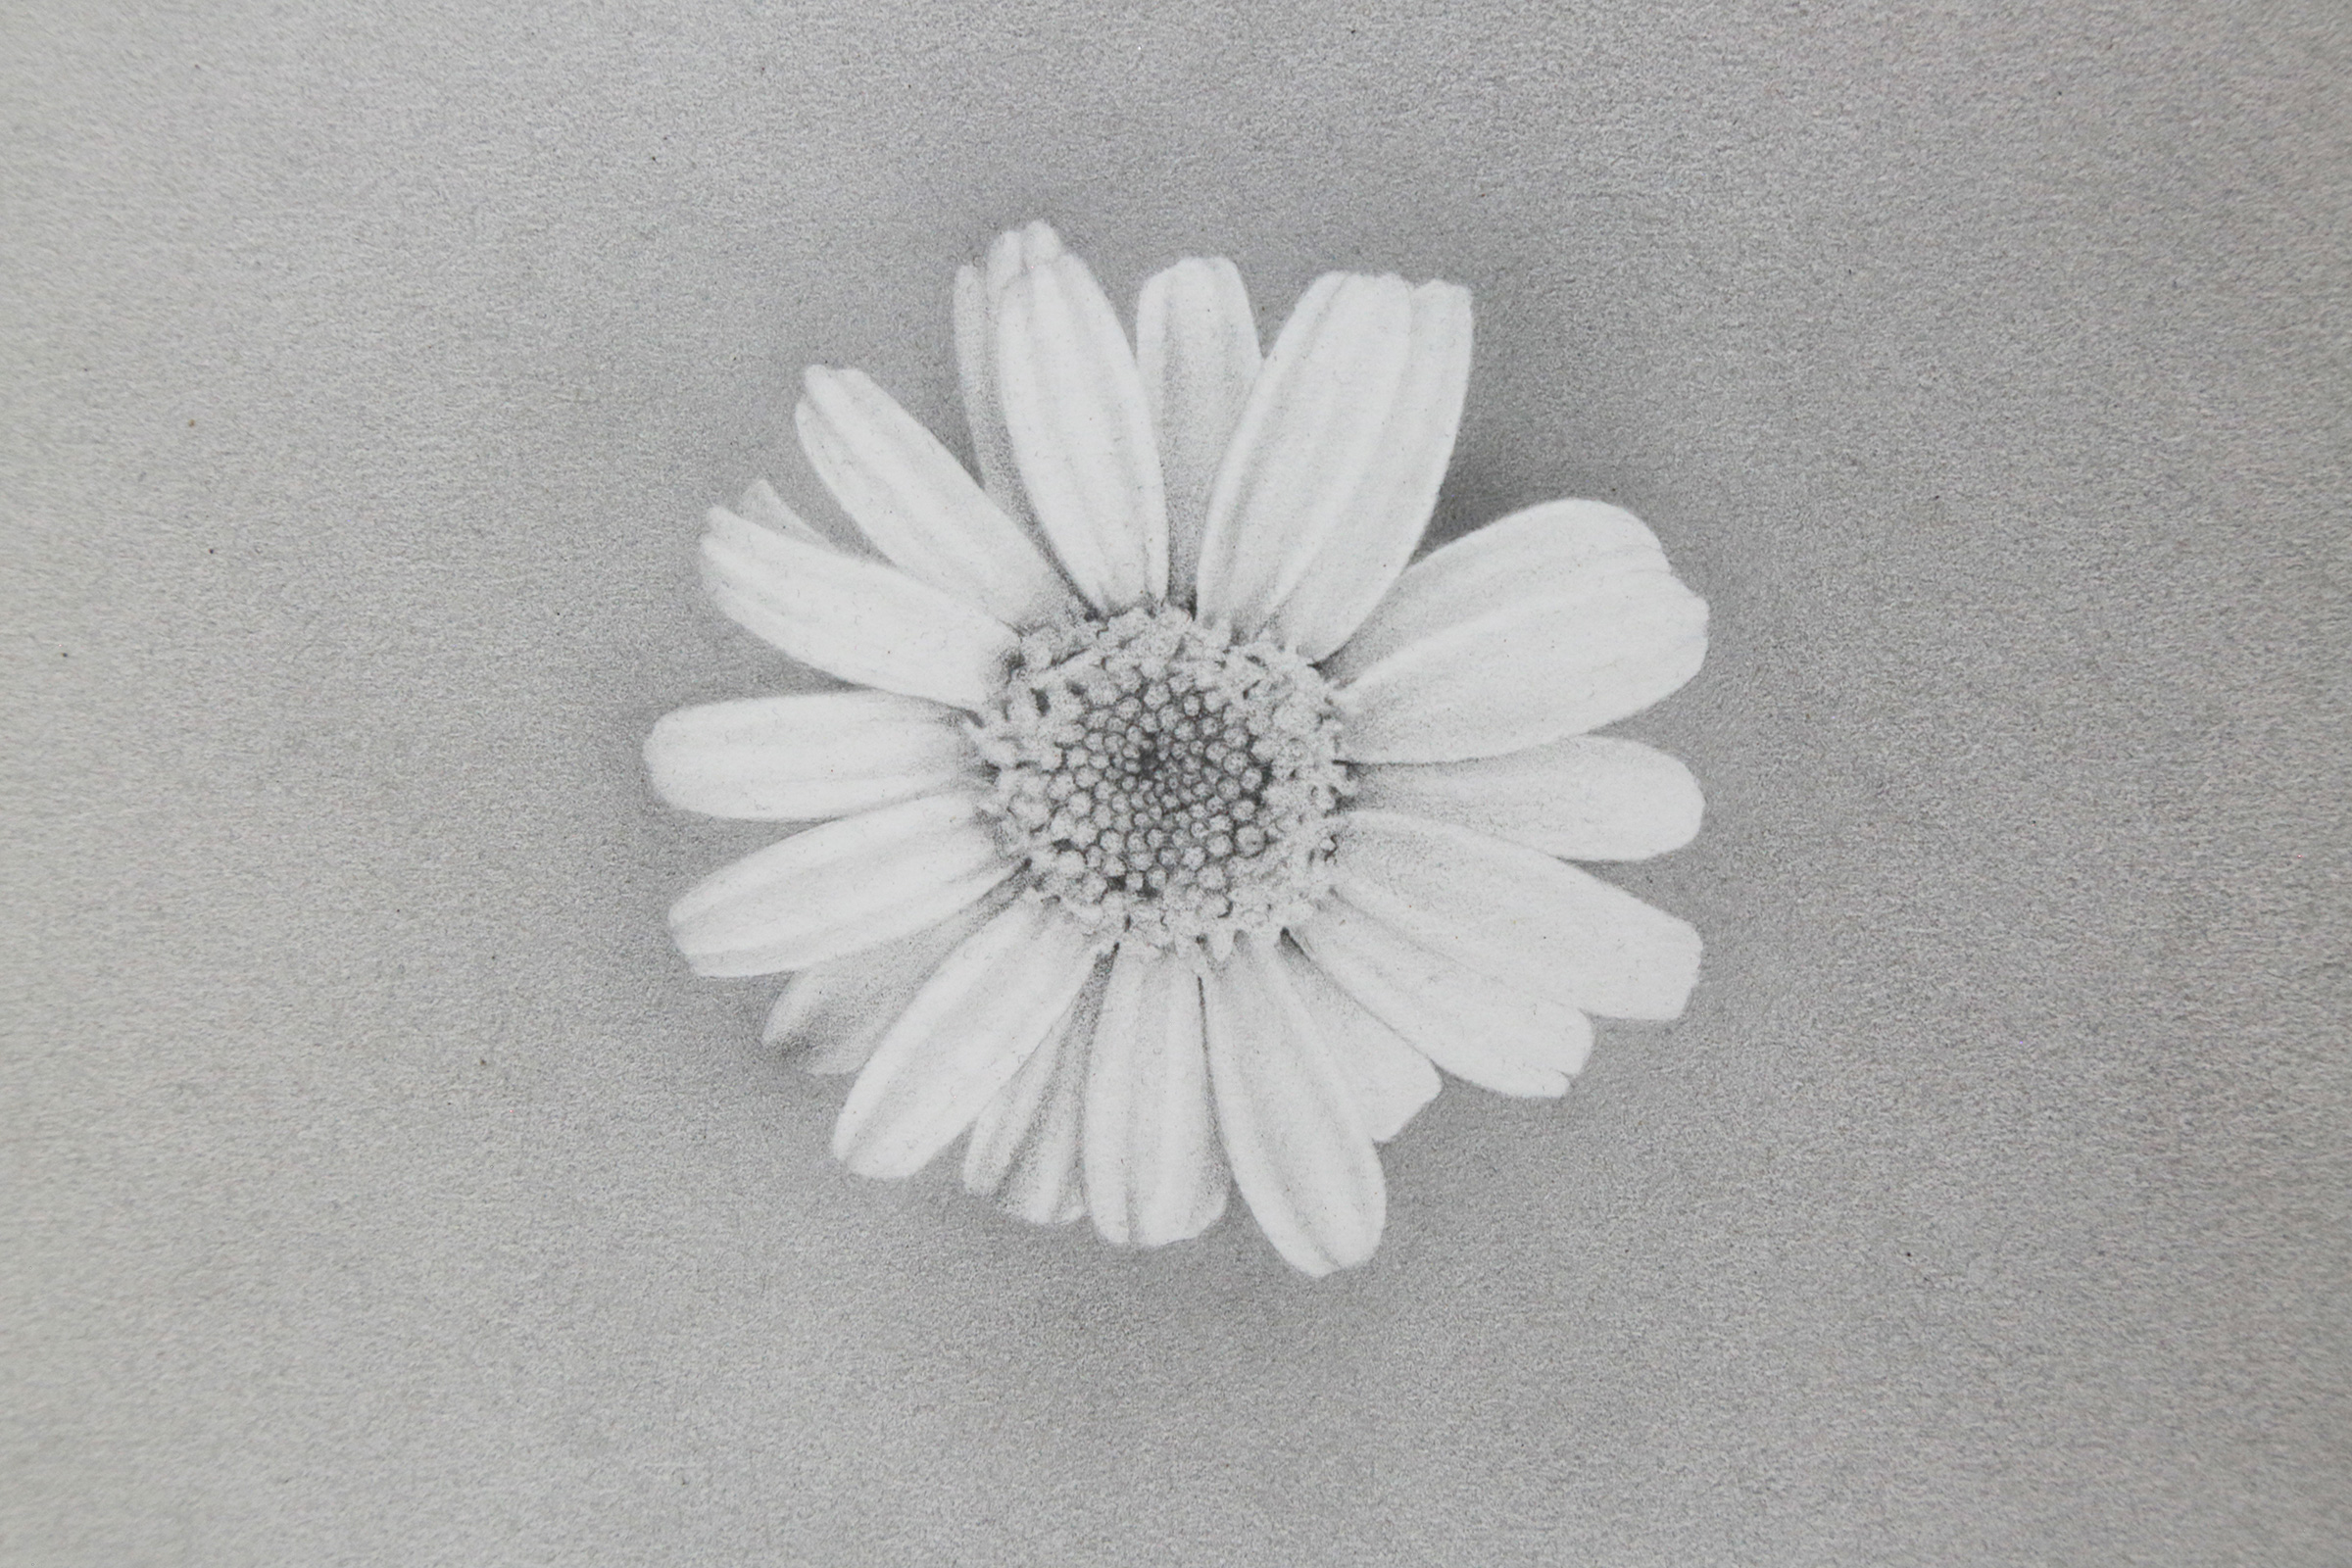 This is a graphite drawing of an ordinary daisy flower. The blossom is centered in the middle of the drawing, surrounded by a matte, gray background also drawn in graphite.